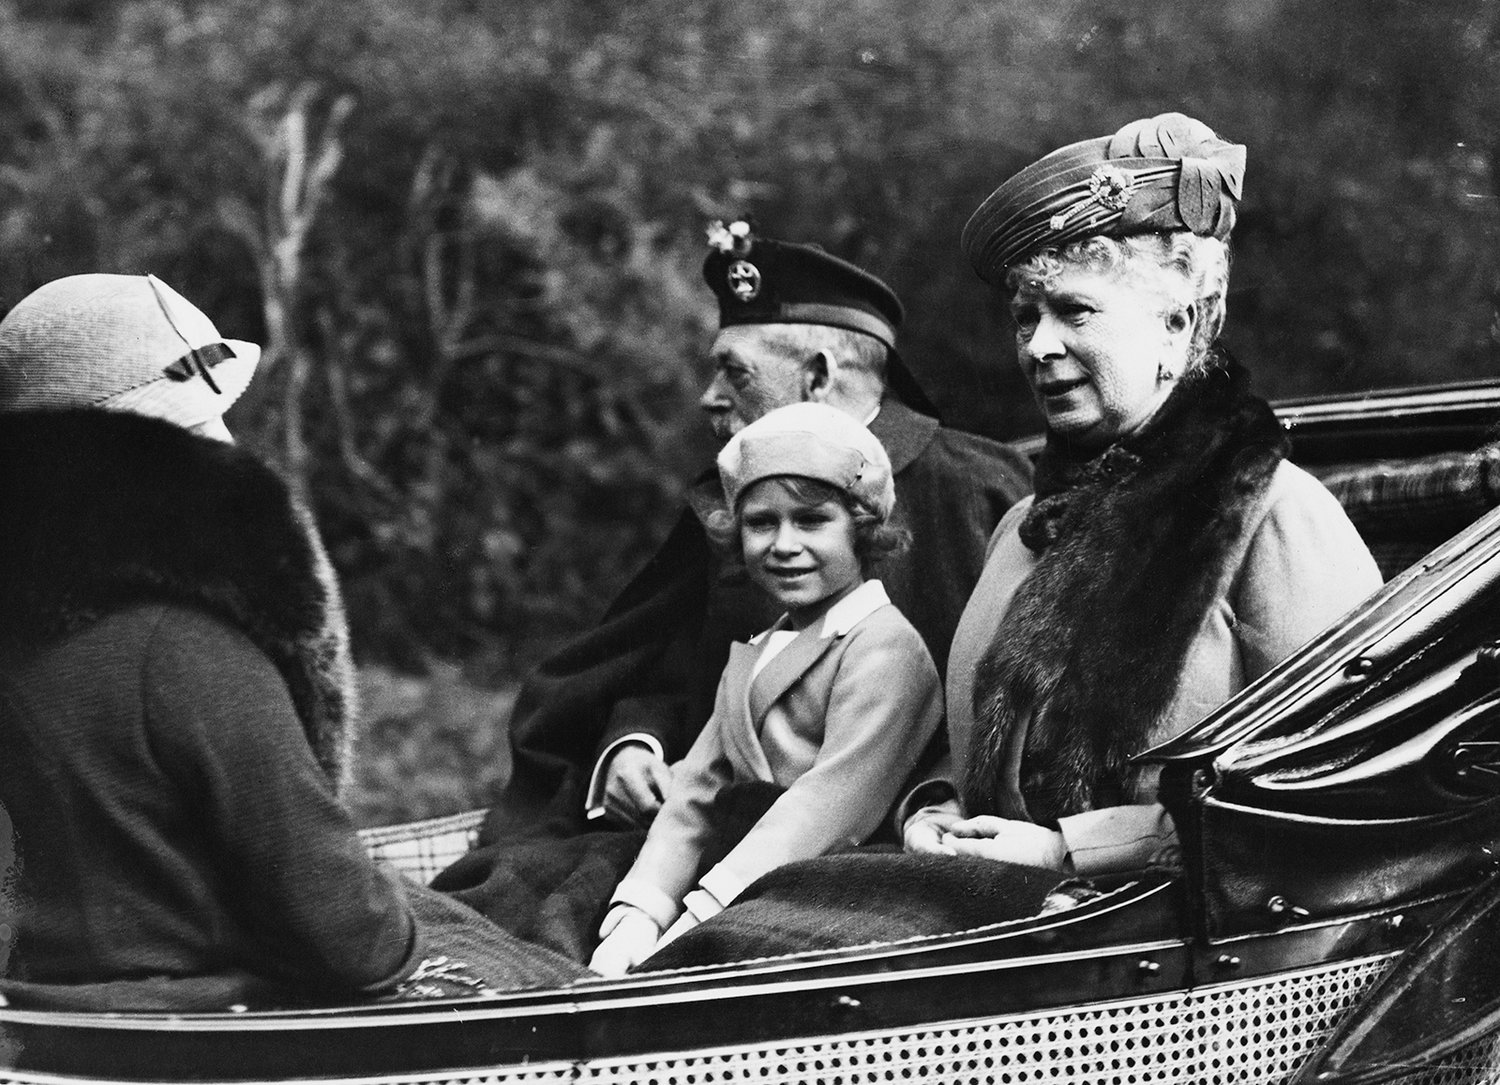 Princess Elizabeth (later Queen Elizabeth II) seated between her grandfather King George V (1865-1936) and grandmother Queen Mary of Teck (1867-1953) as they ride in a carriage back to Balmoral Castle from Crathie Kirk near Braemar in Scotland in August 1935. (Topical Press Agency/Getty Images/TNS)